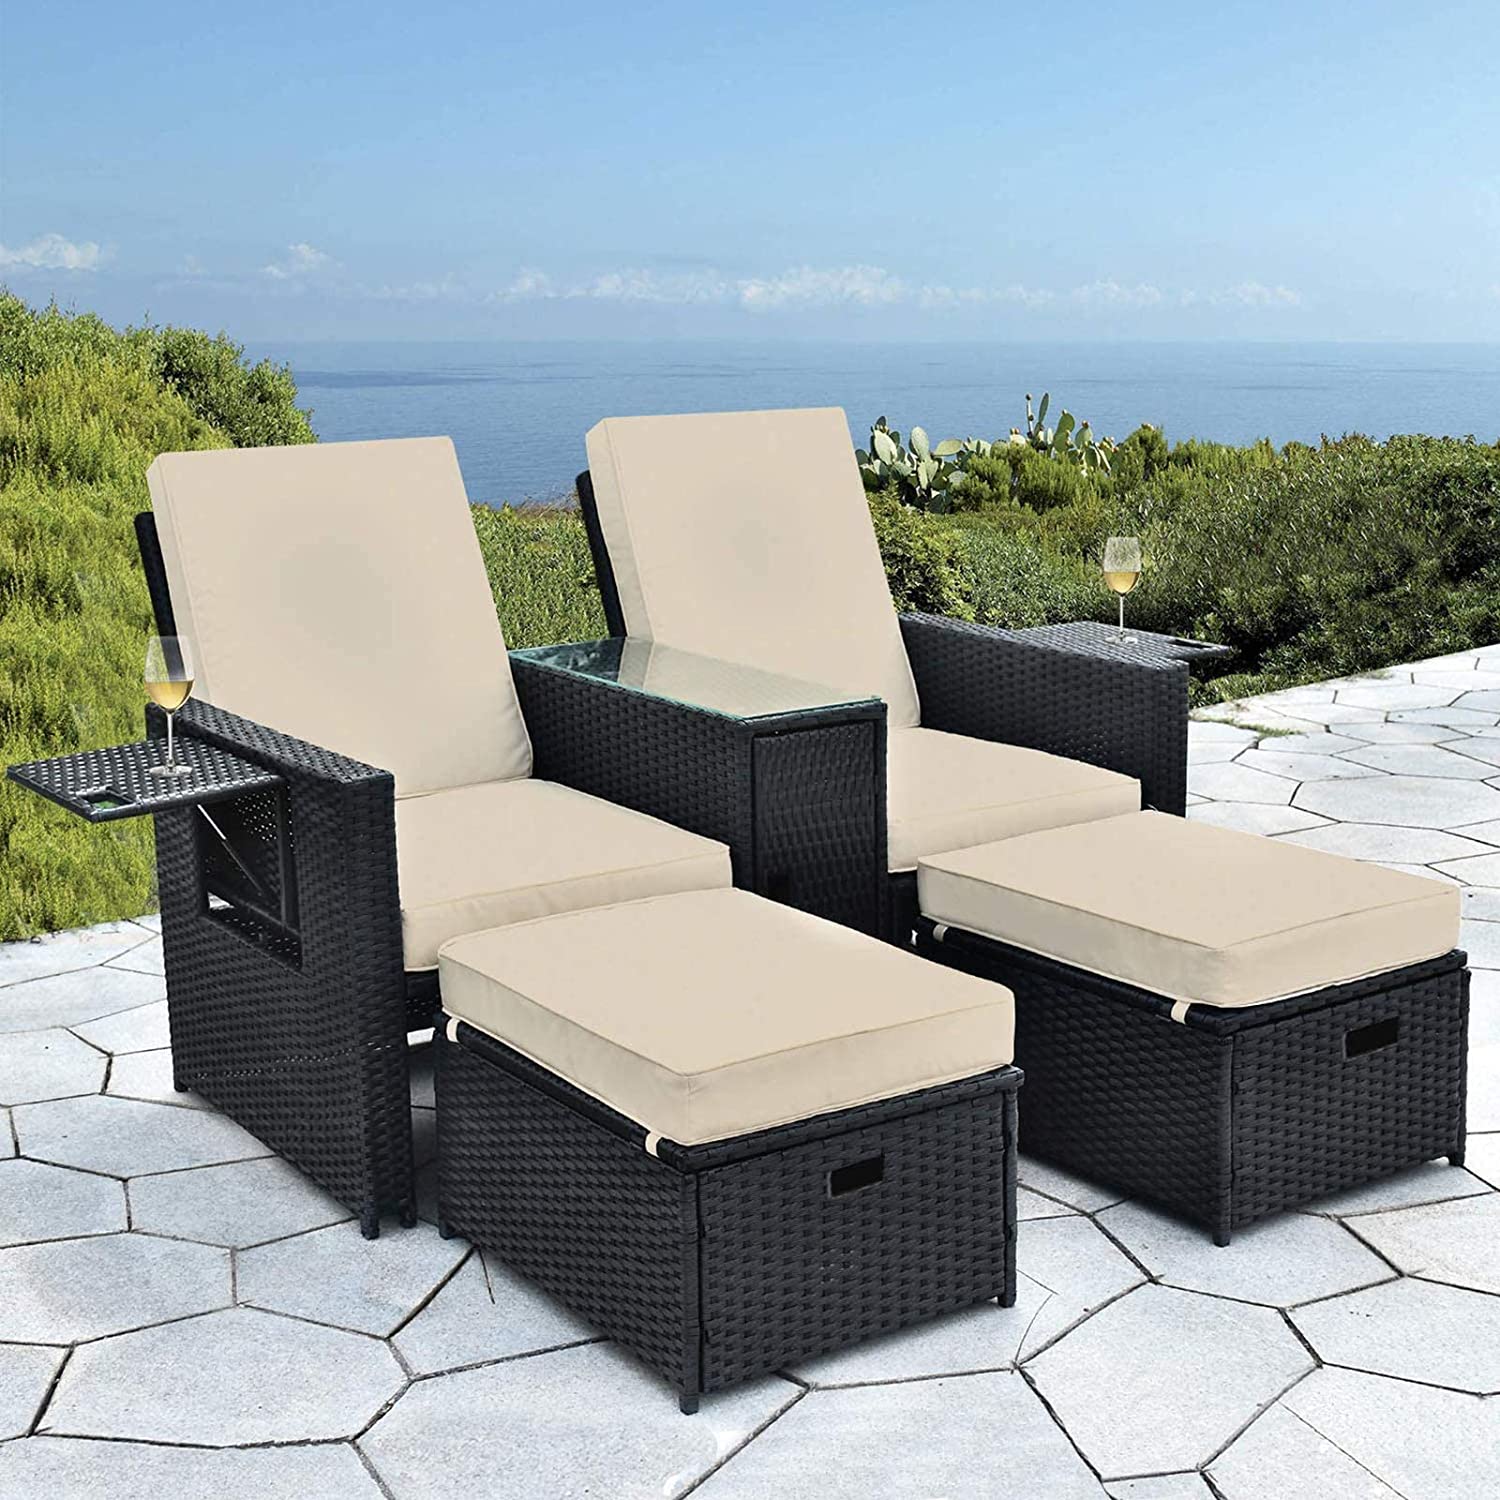 LVUYOYO 5pcs Patio Wicker Loveseat - Outdoor Rattan Sofa Set with Cushion and Ottoman Footrestfor Garden - image 1 of 9